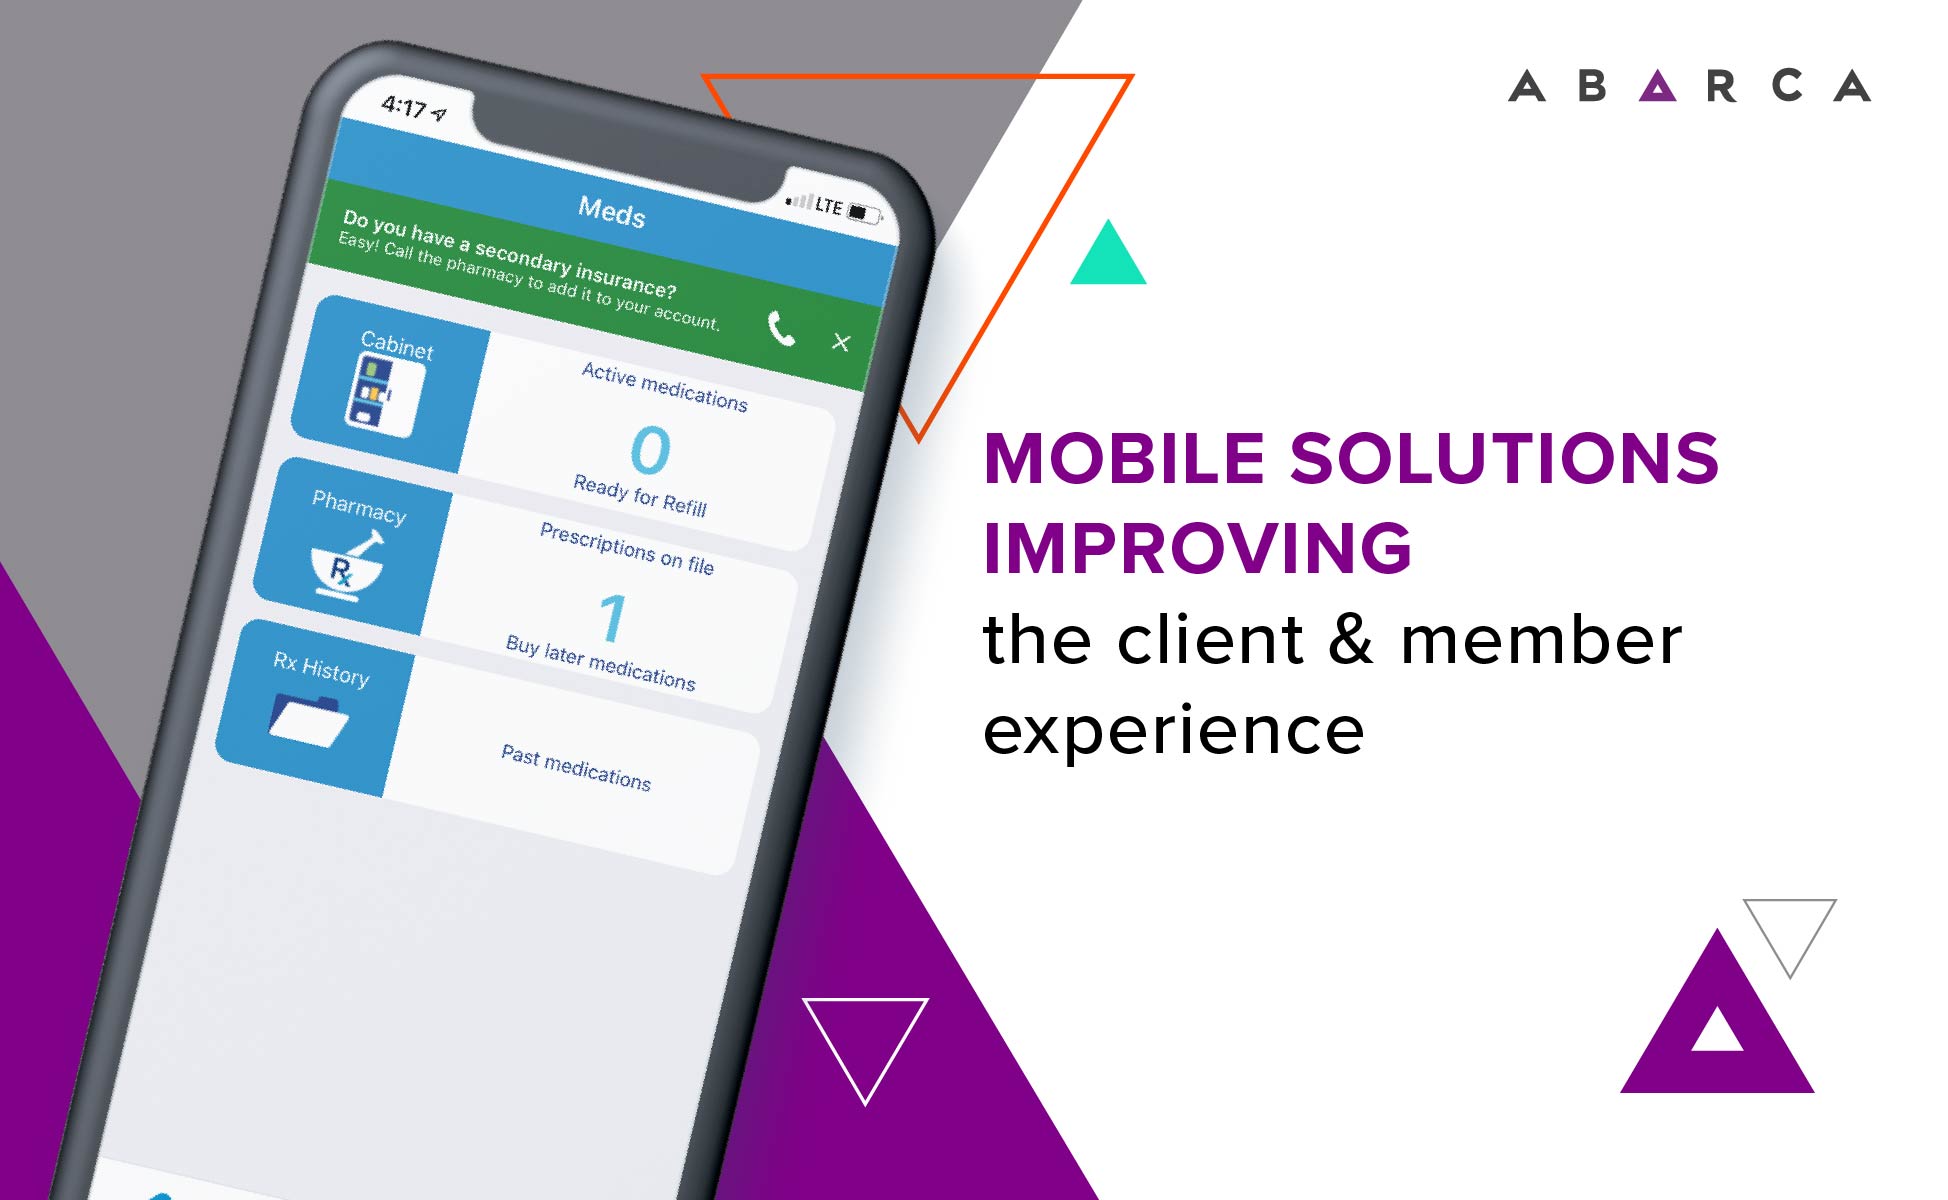 Abarca Health: Mobile solutions improving the client and member experience